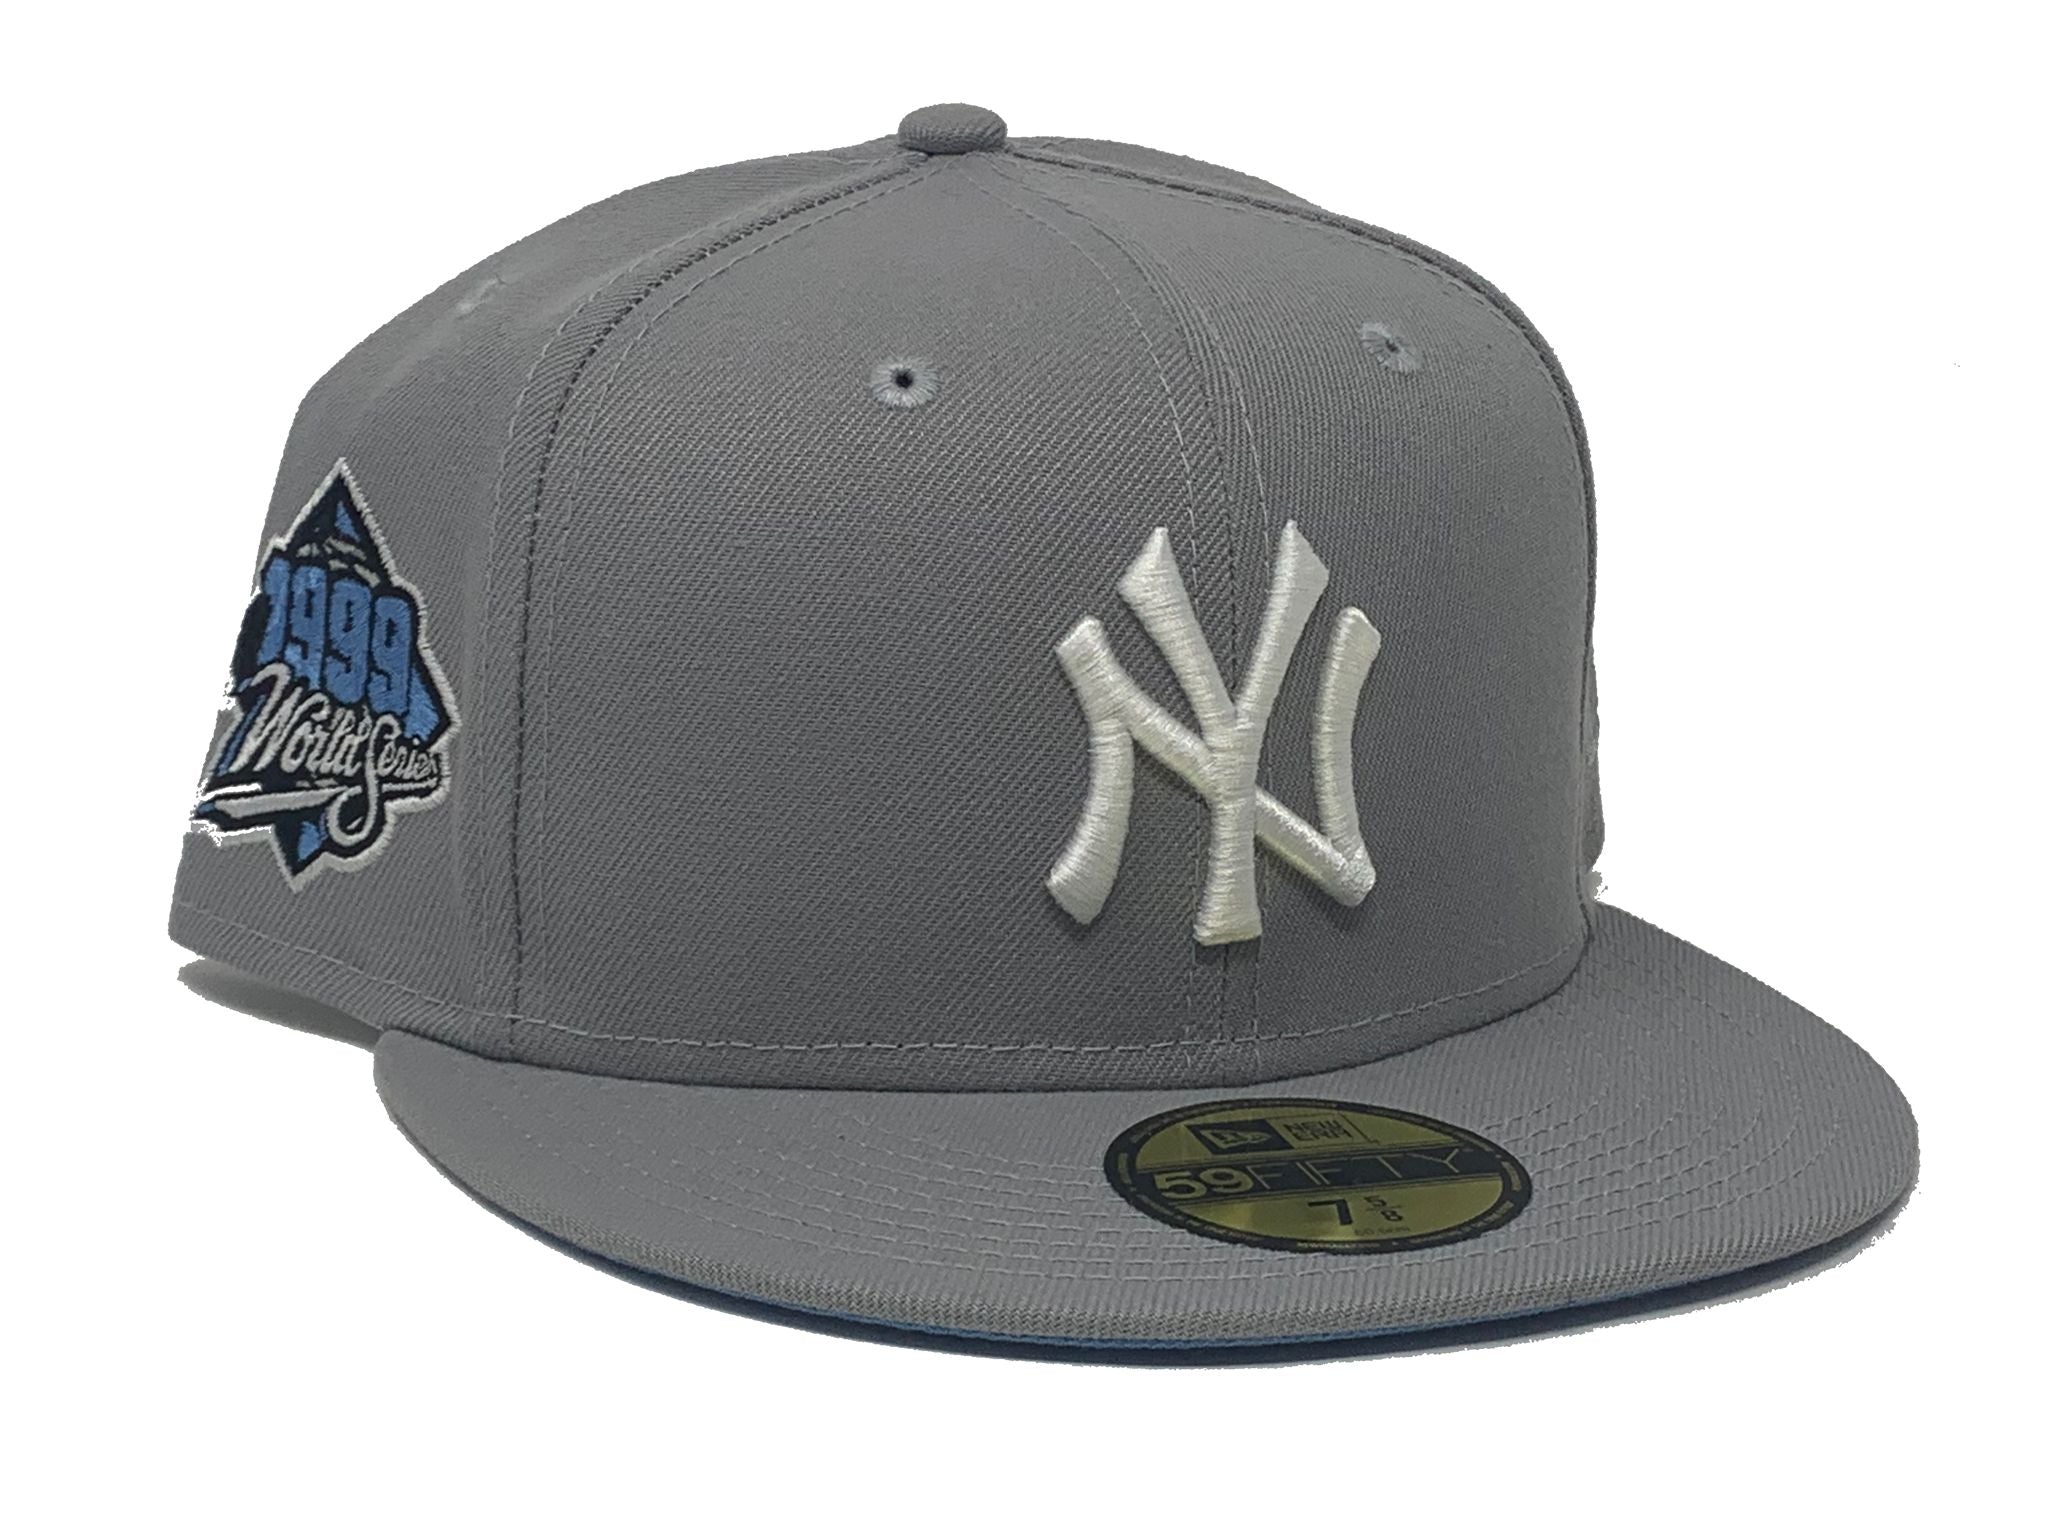 New York Yankees New Era 59FIFTY Fitted Hats (1996 World Series Side Patch Gray Under BRIM) - NY Yankees Grey Underbrim Caps - BX Bombers Fitteds 7 1/